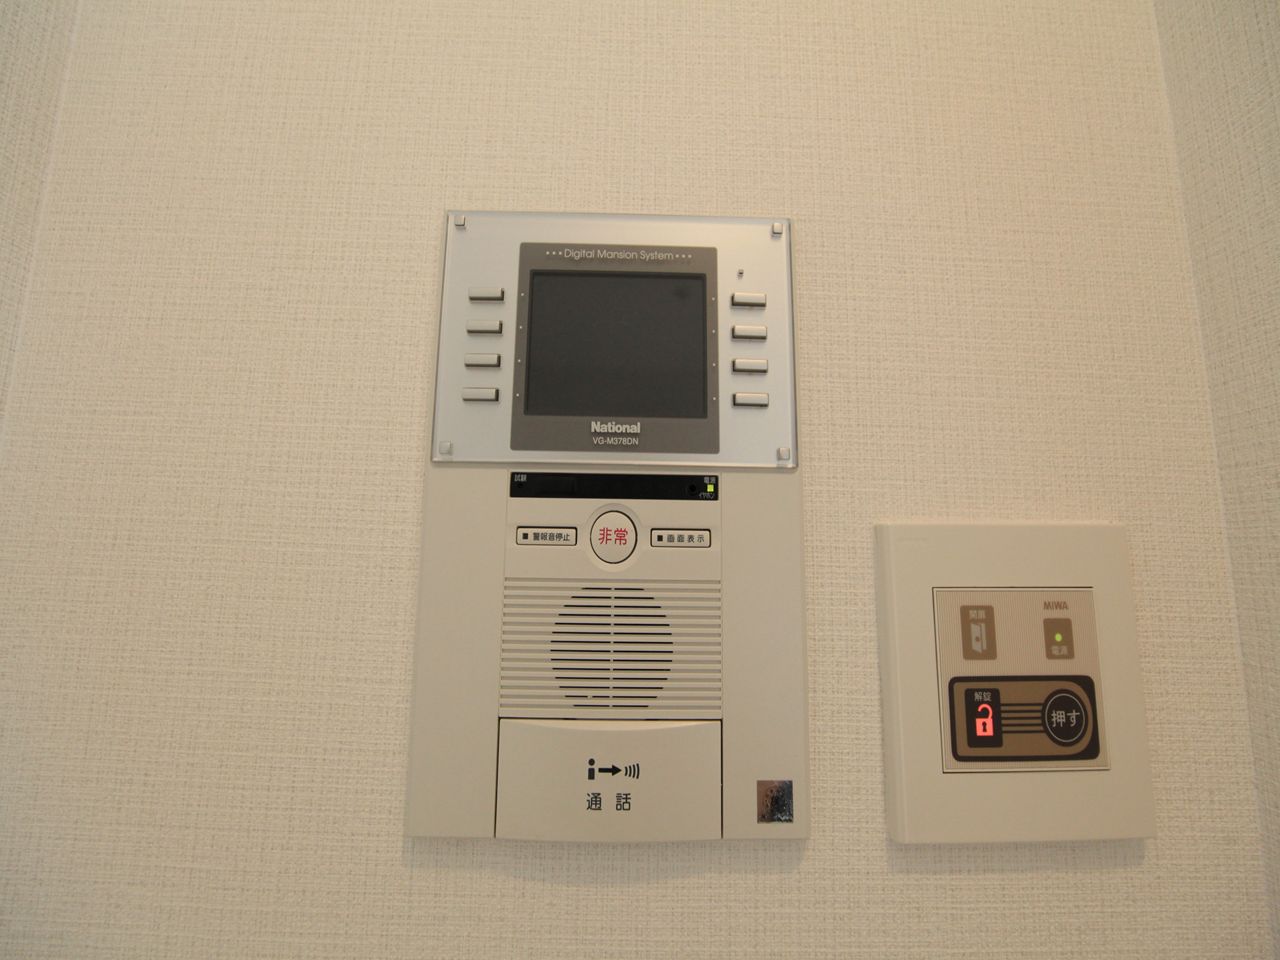 Security. Intercom with TV monitor You can open and close the key out of the room